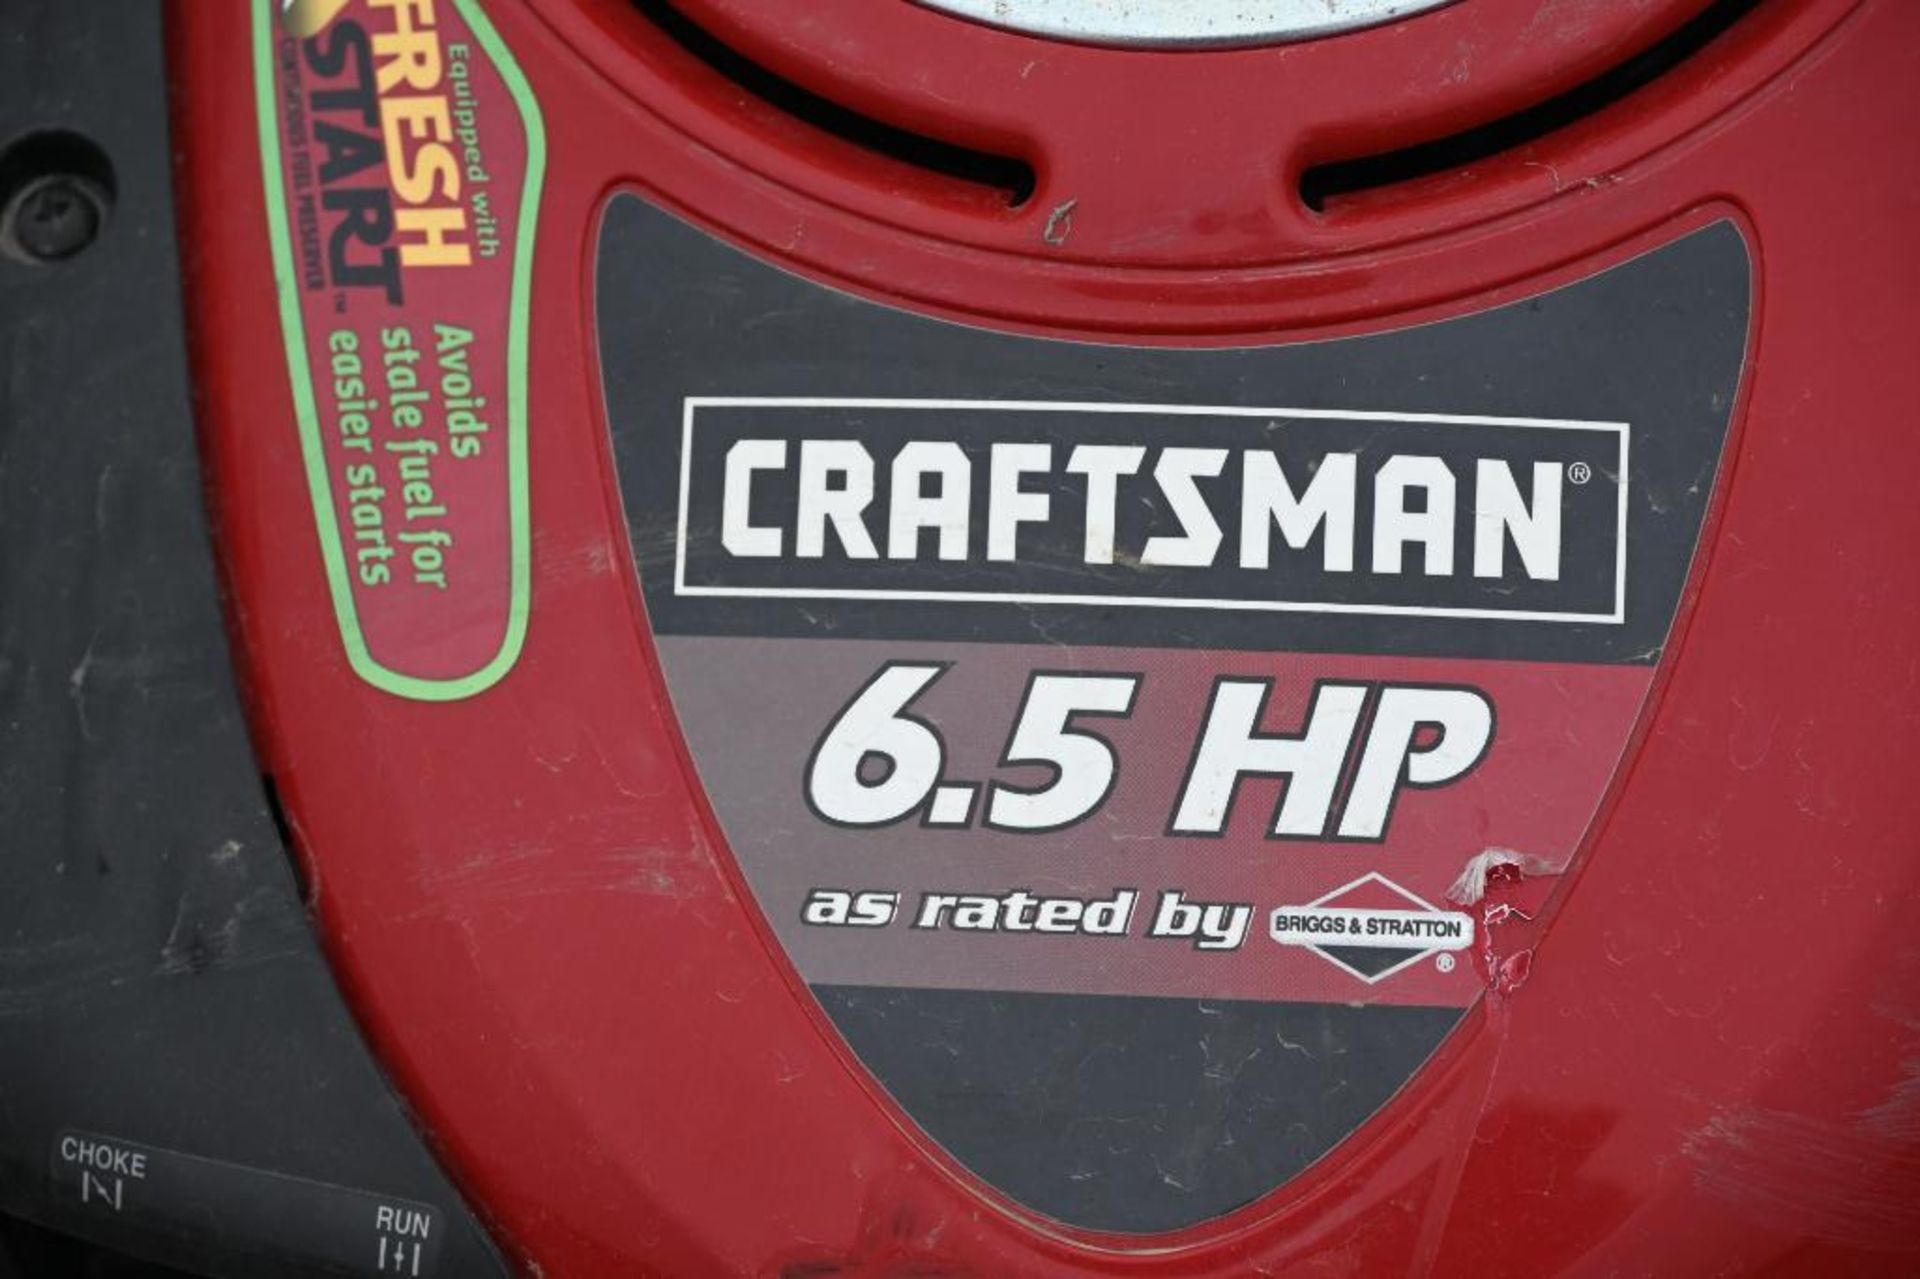 Craftsman 4-in-1 Vacuum, Shredder, Chipper, and Blower - Image 5 of 9